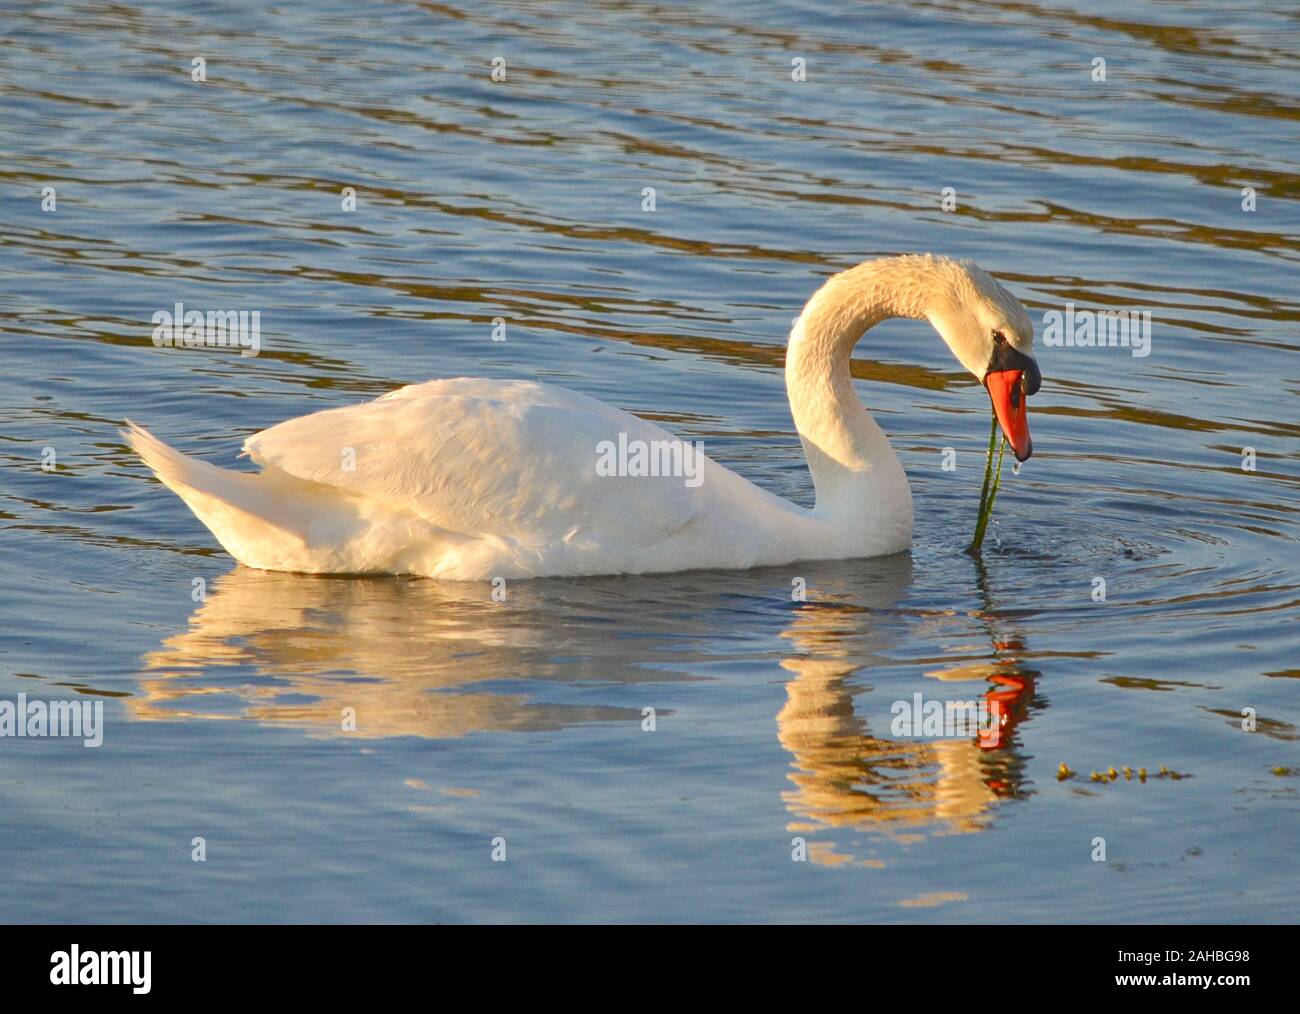 A beautiful adult Mute swan floats in a Long Island harbor. The bird's reflection is slightly blurred by wavelets in the water. (Cygnus olor) Stock Photo